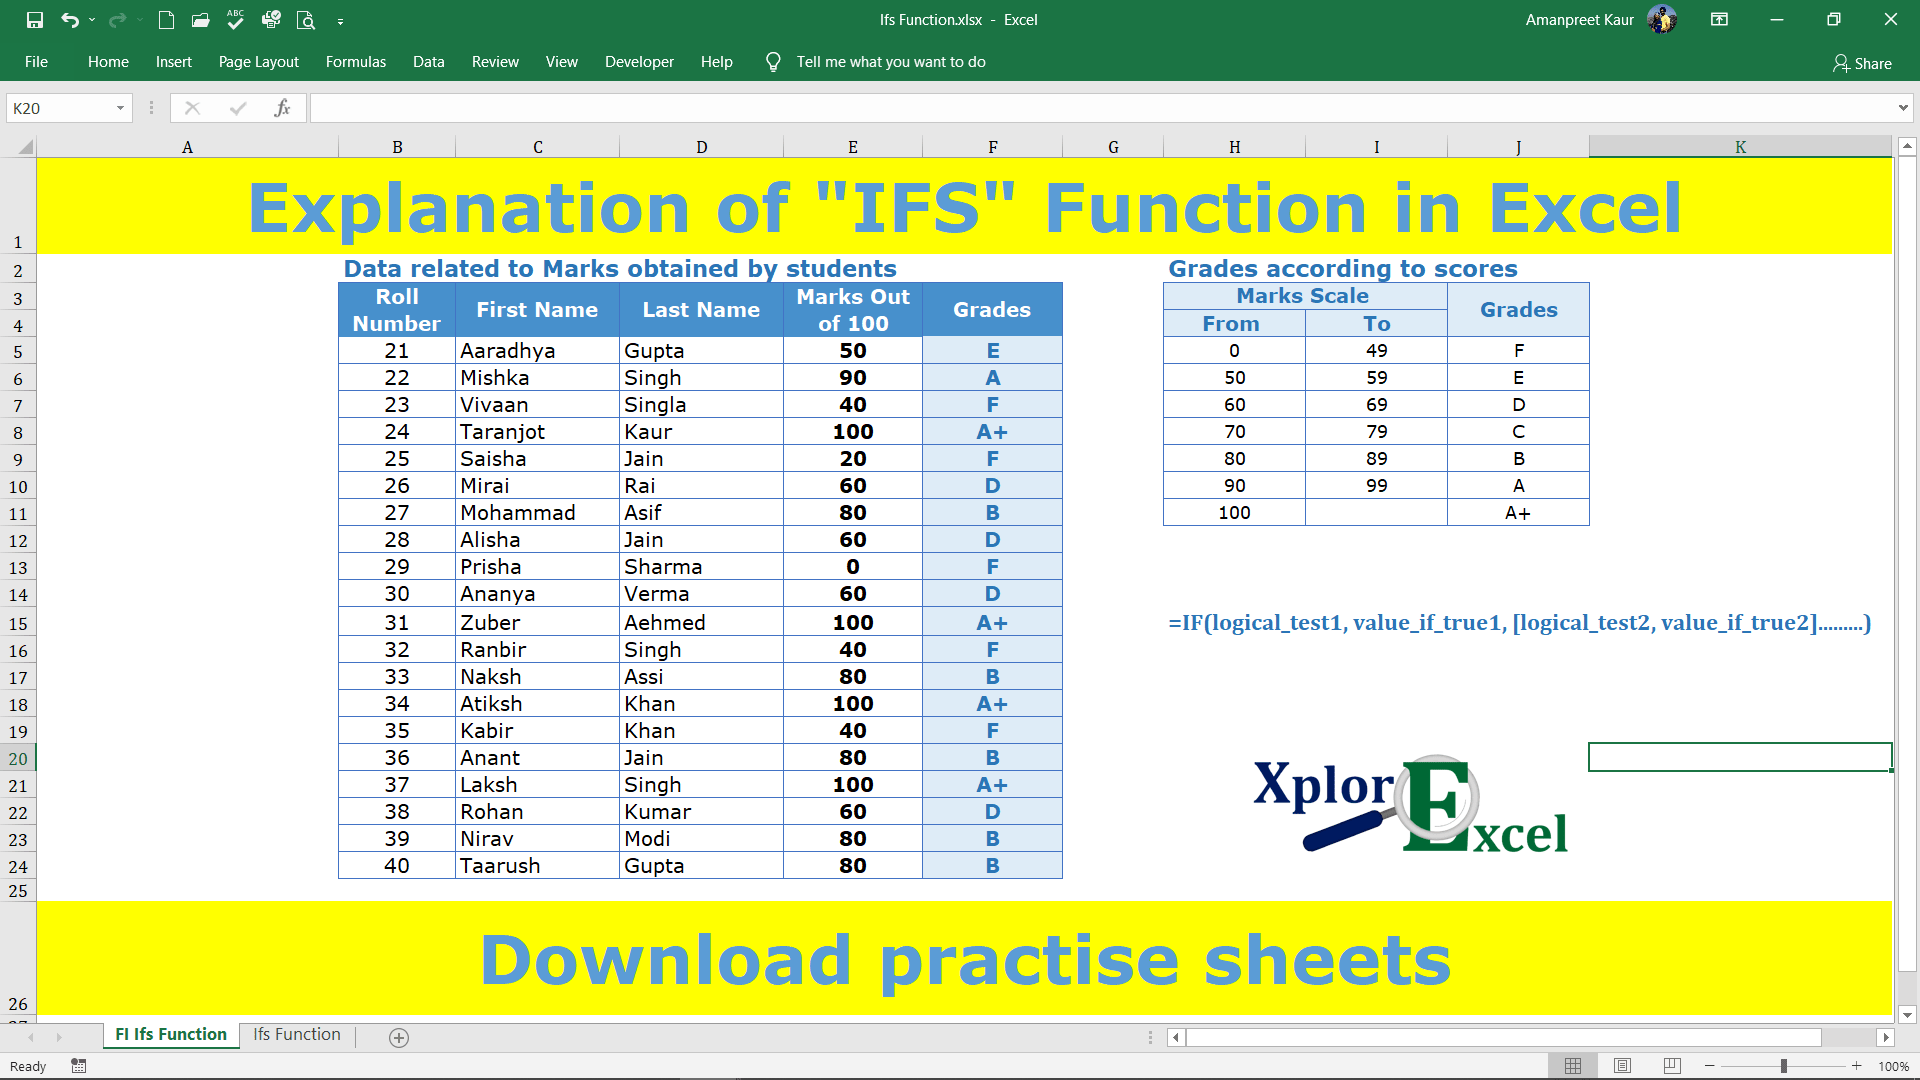 IFS Function in Excel – Free 2 Practice workbooks